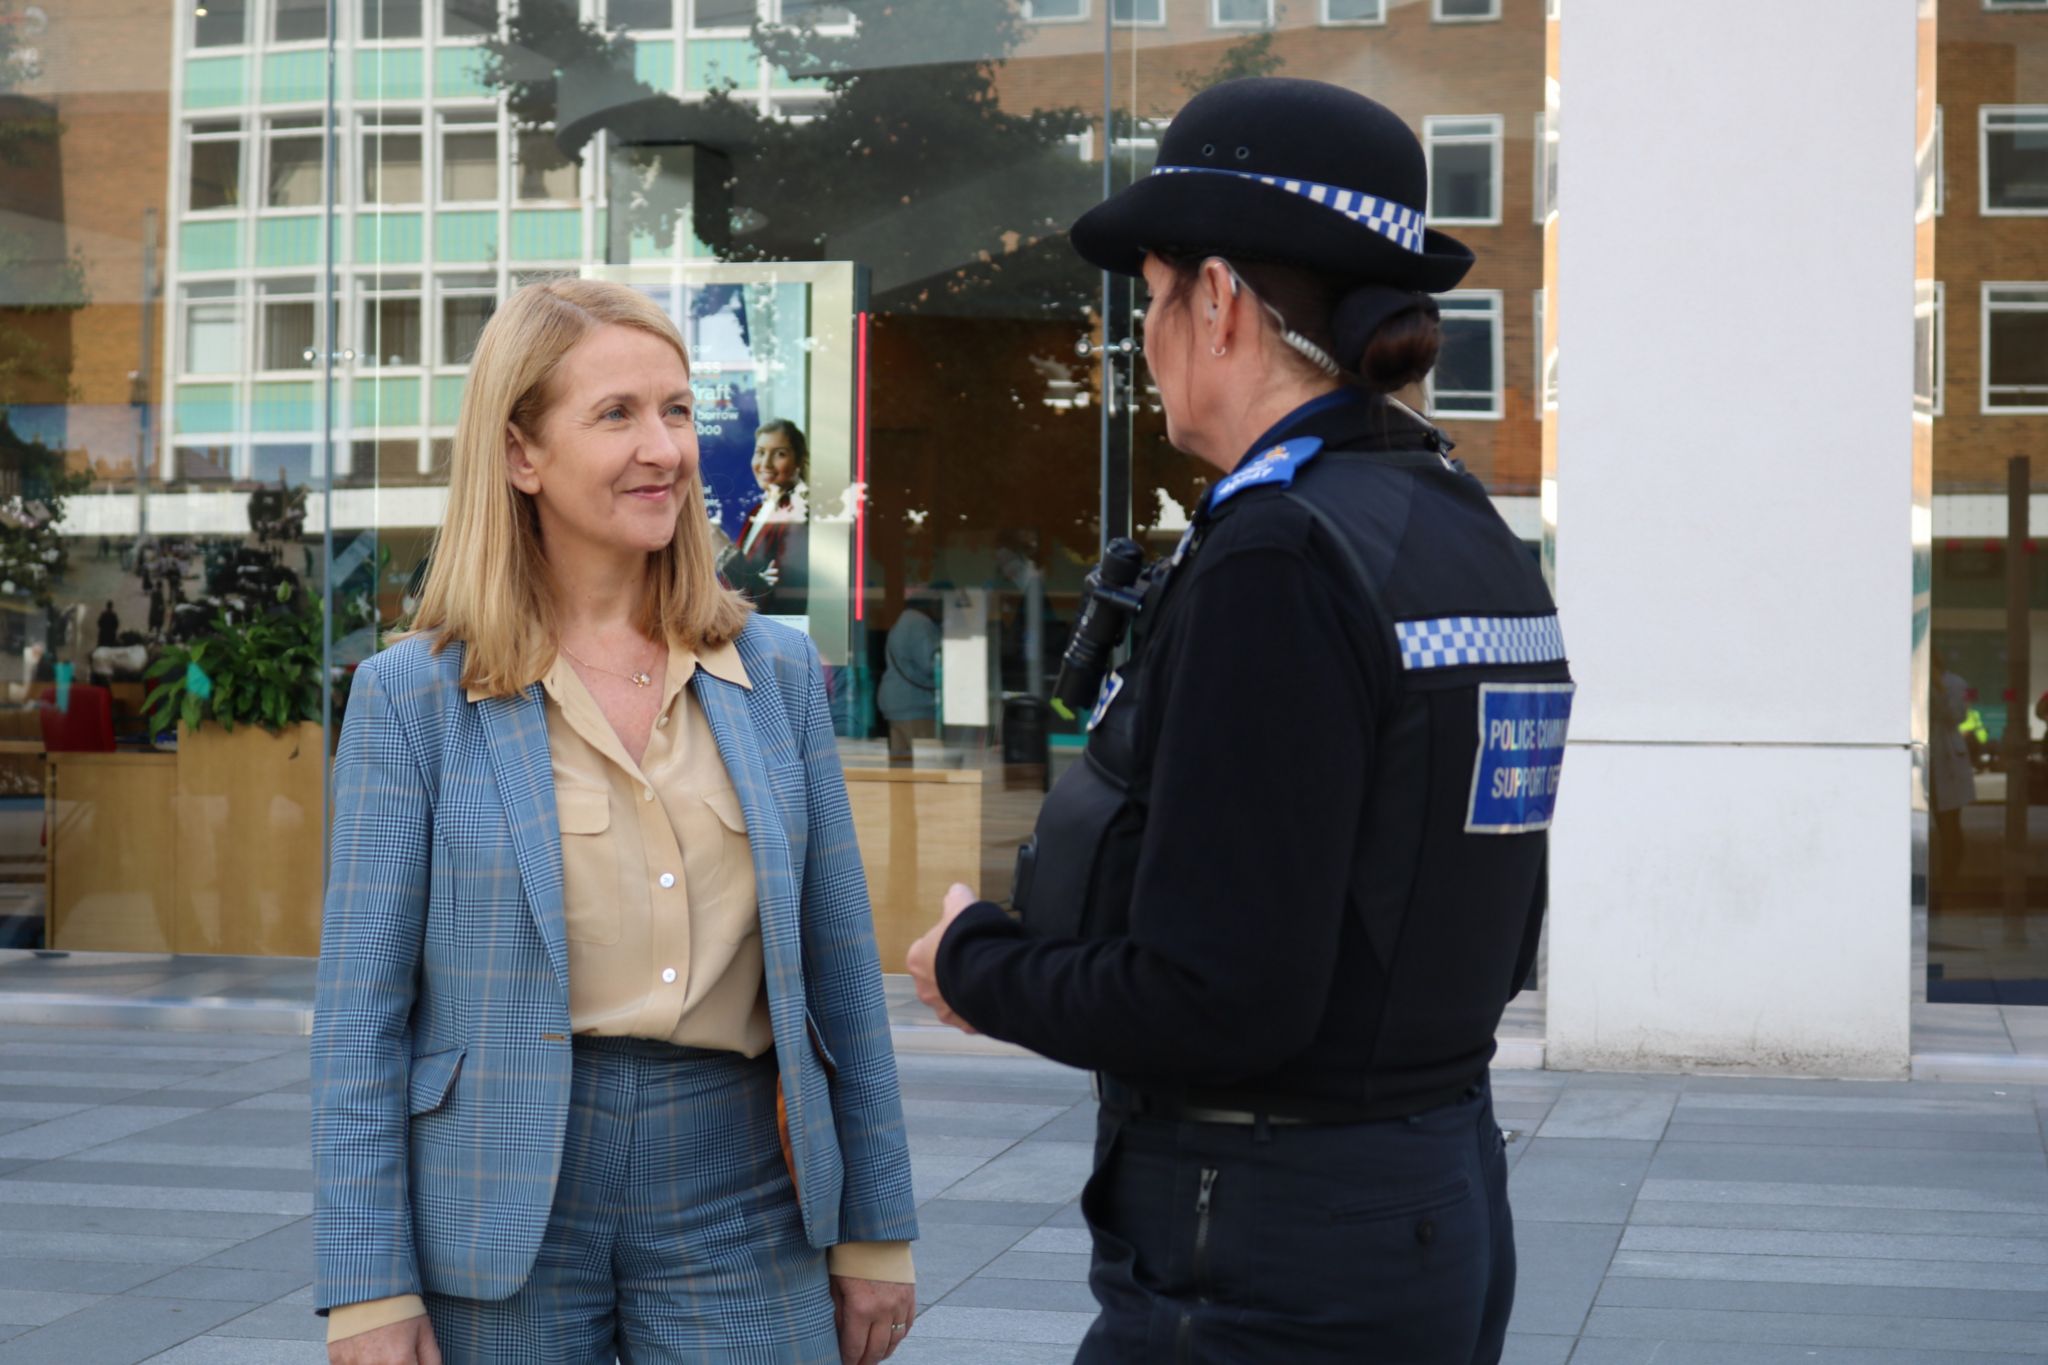 Police and Crime Commissioner for Sussex Katy Bourne (left) was stalked after after being elected